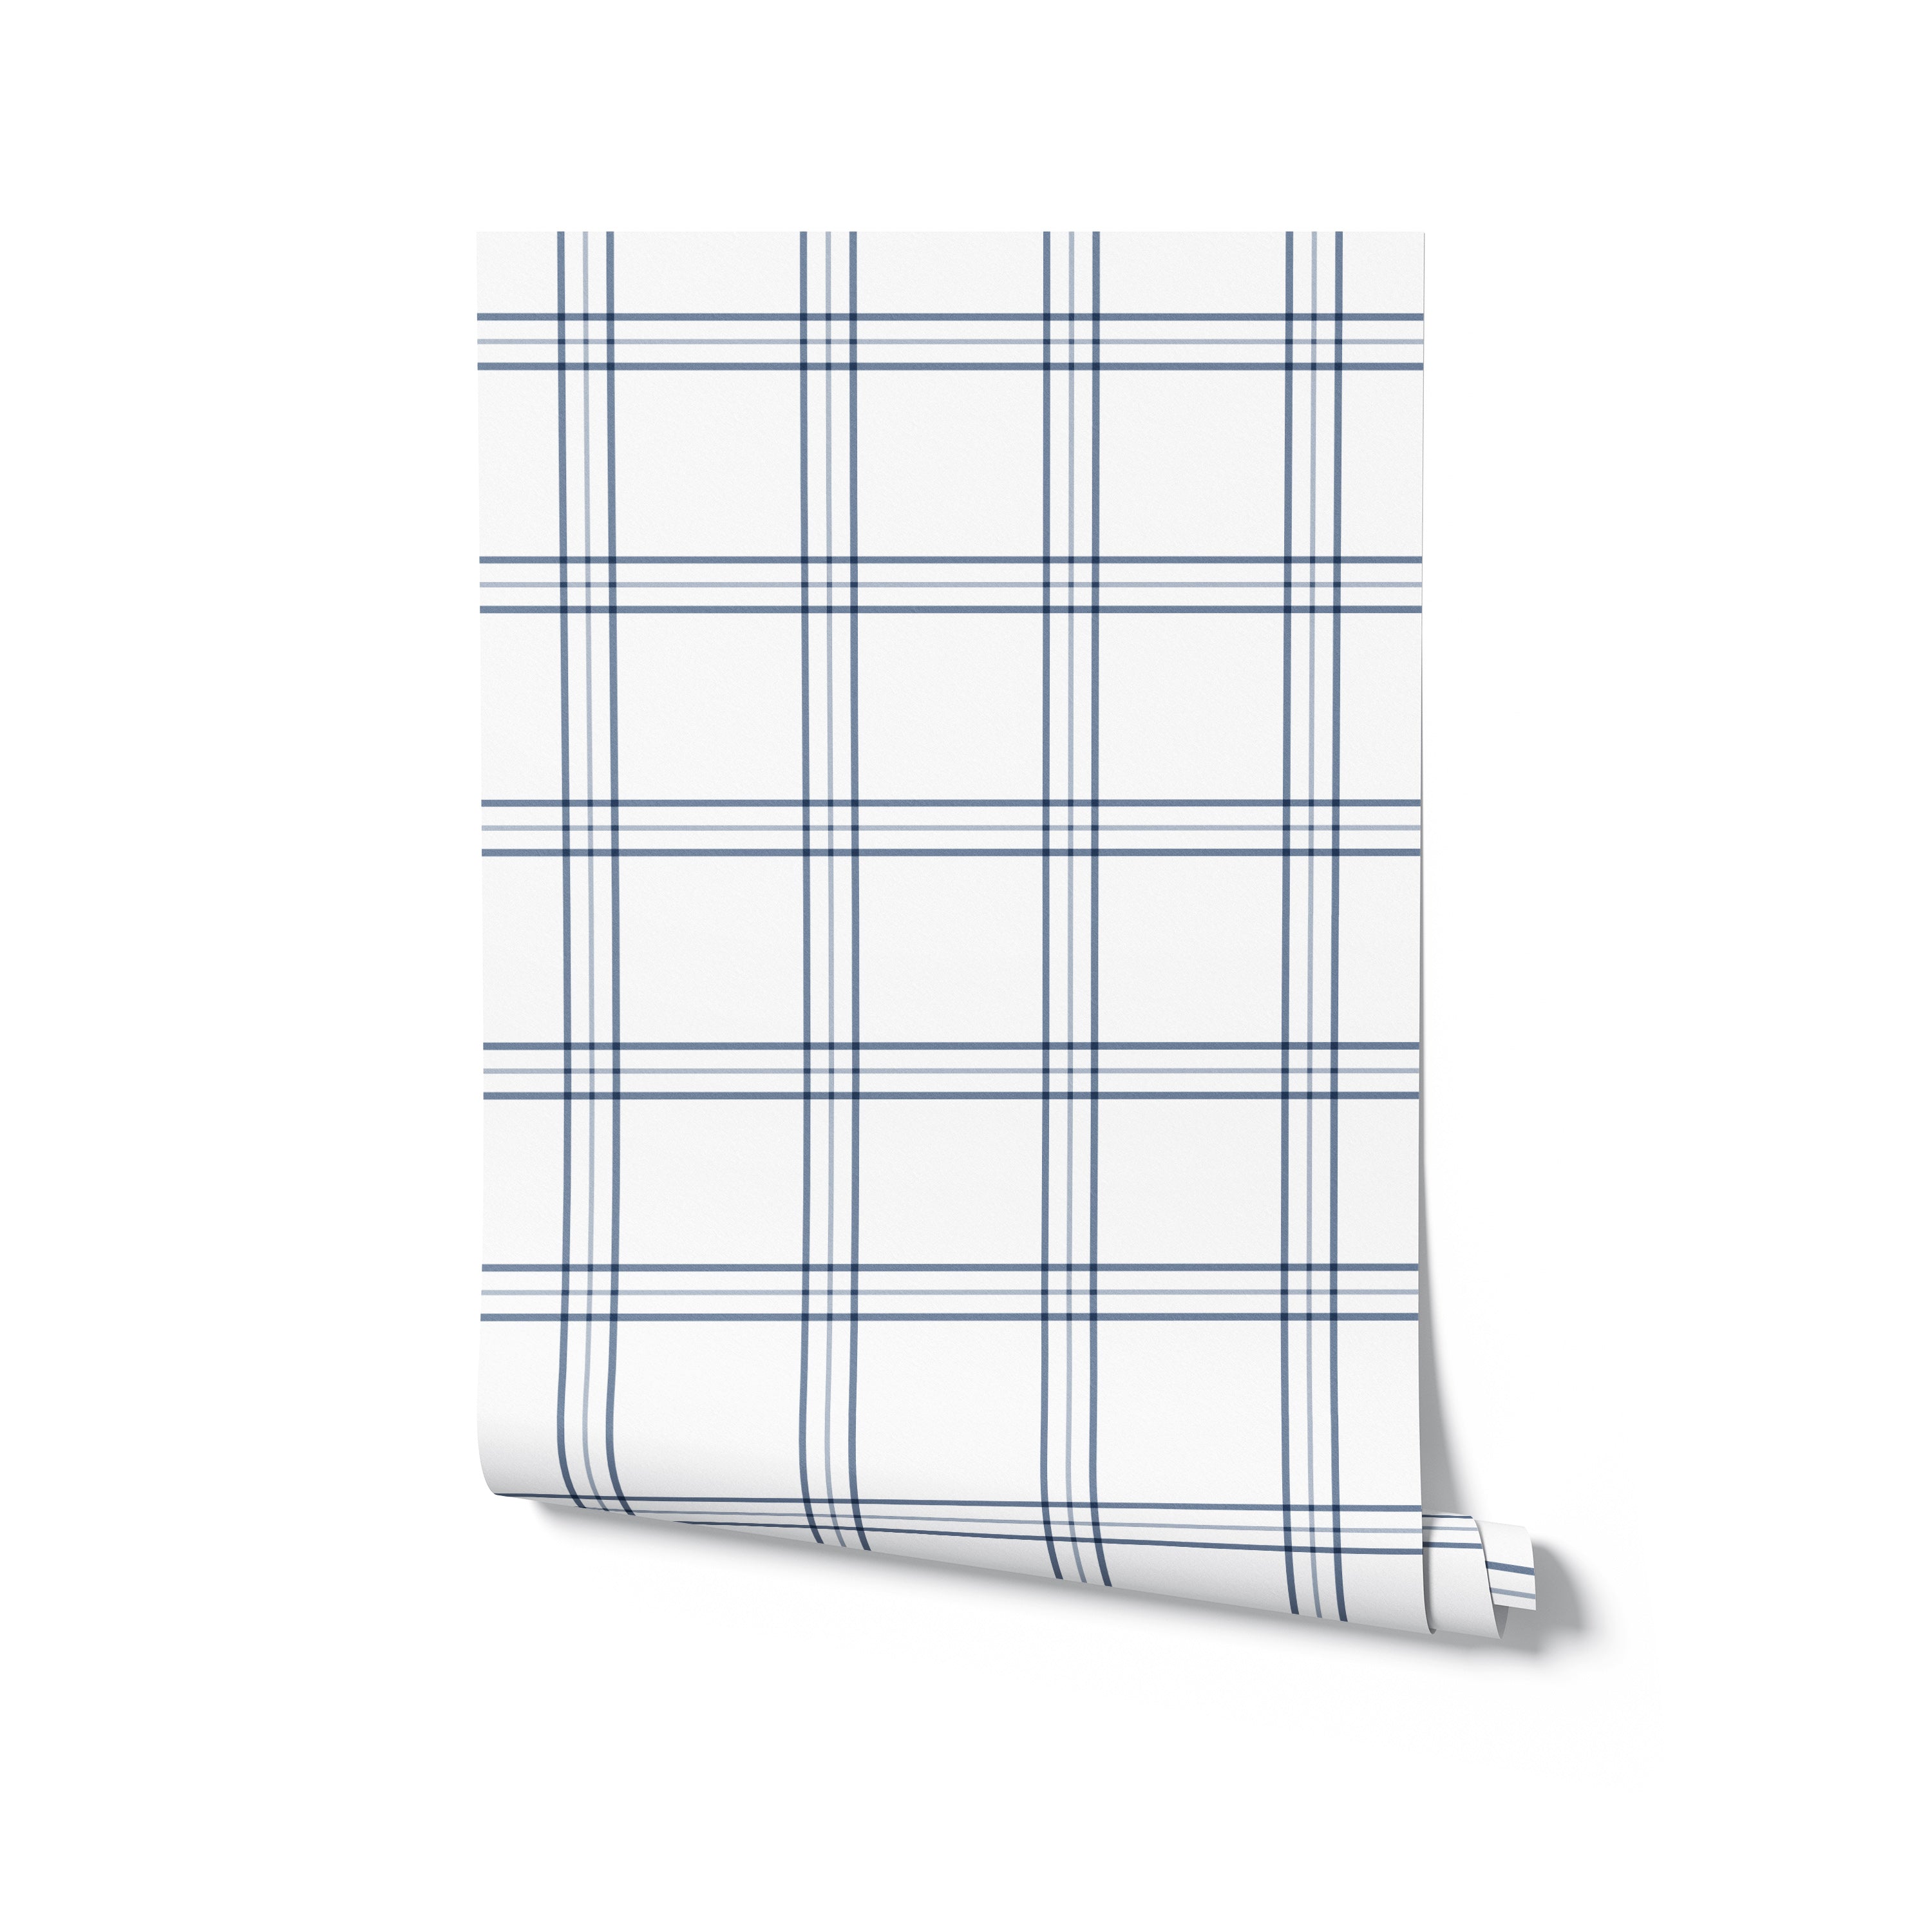 A rolled sample of Traditional Tartan Plaid Wallpaper highlighting the fabric-like texture and timeless pattern of Navy blue stripes, suggesting a design that could bring a sense of heritage and comfort to interiors ranging from the modern to the classic.